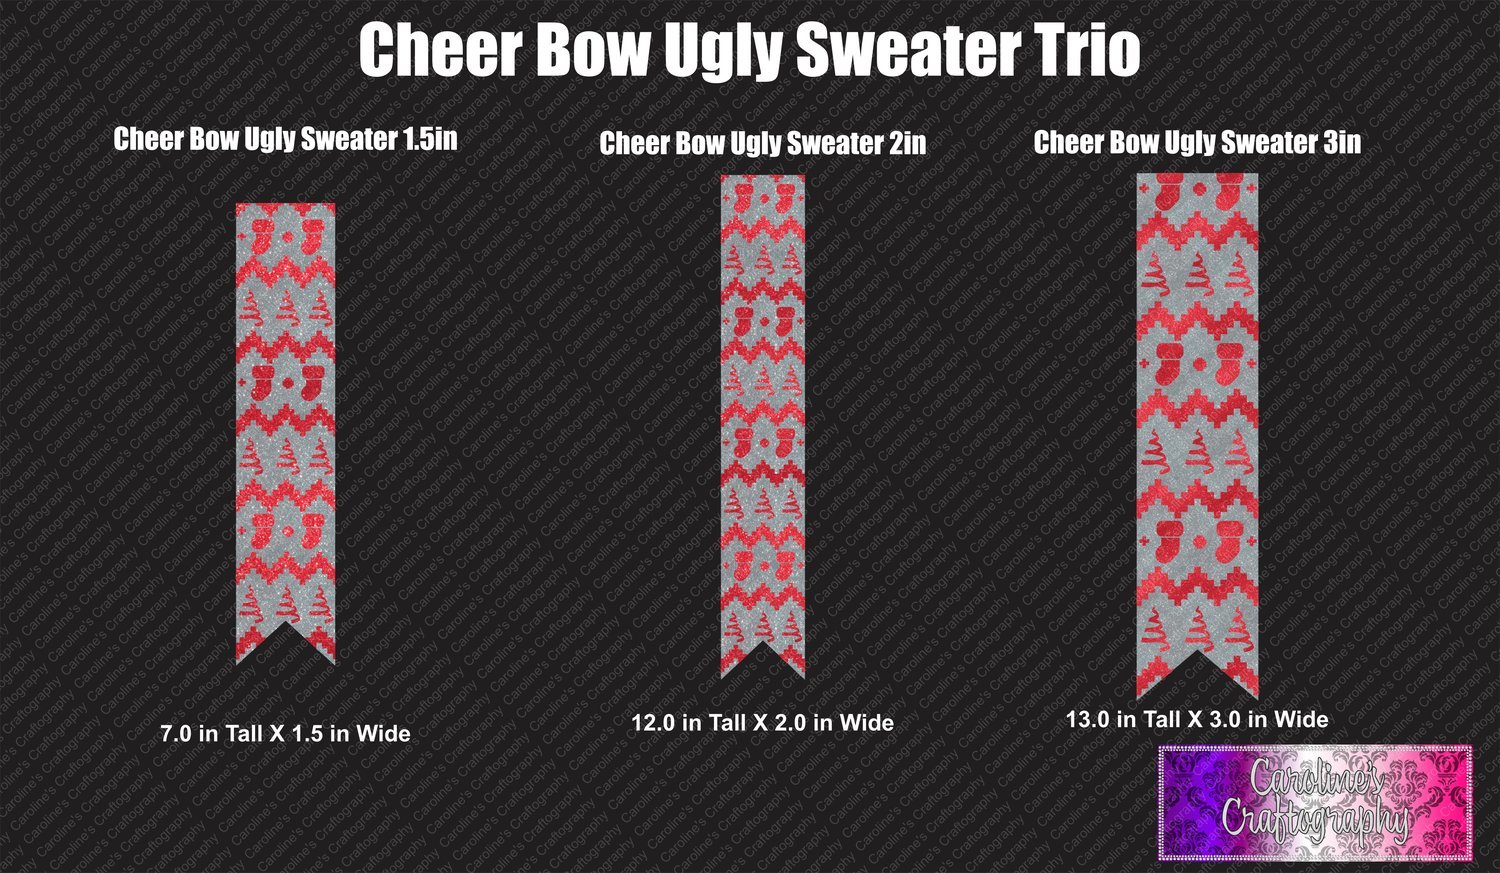 Ugly Sweater Cheer Bow Trio